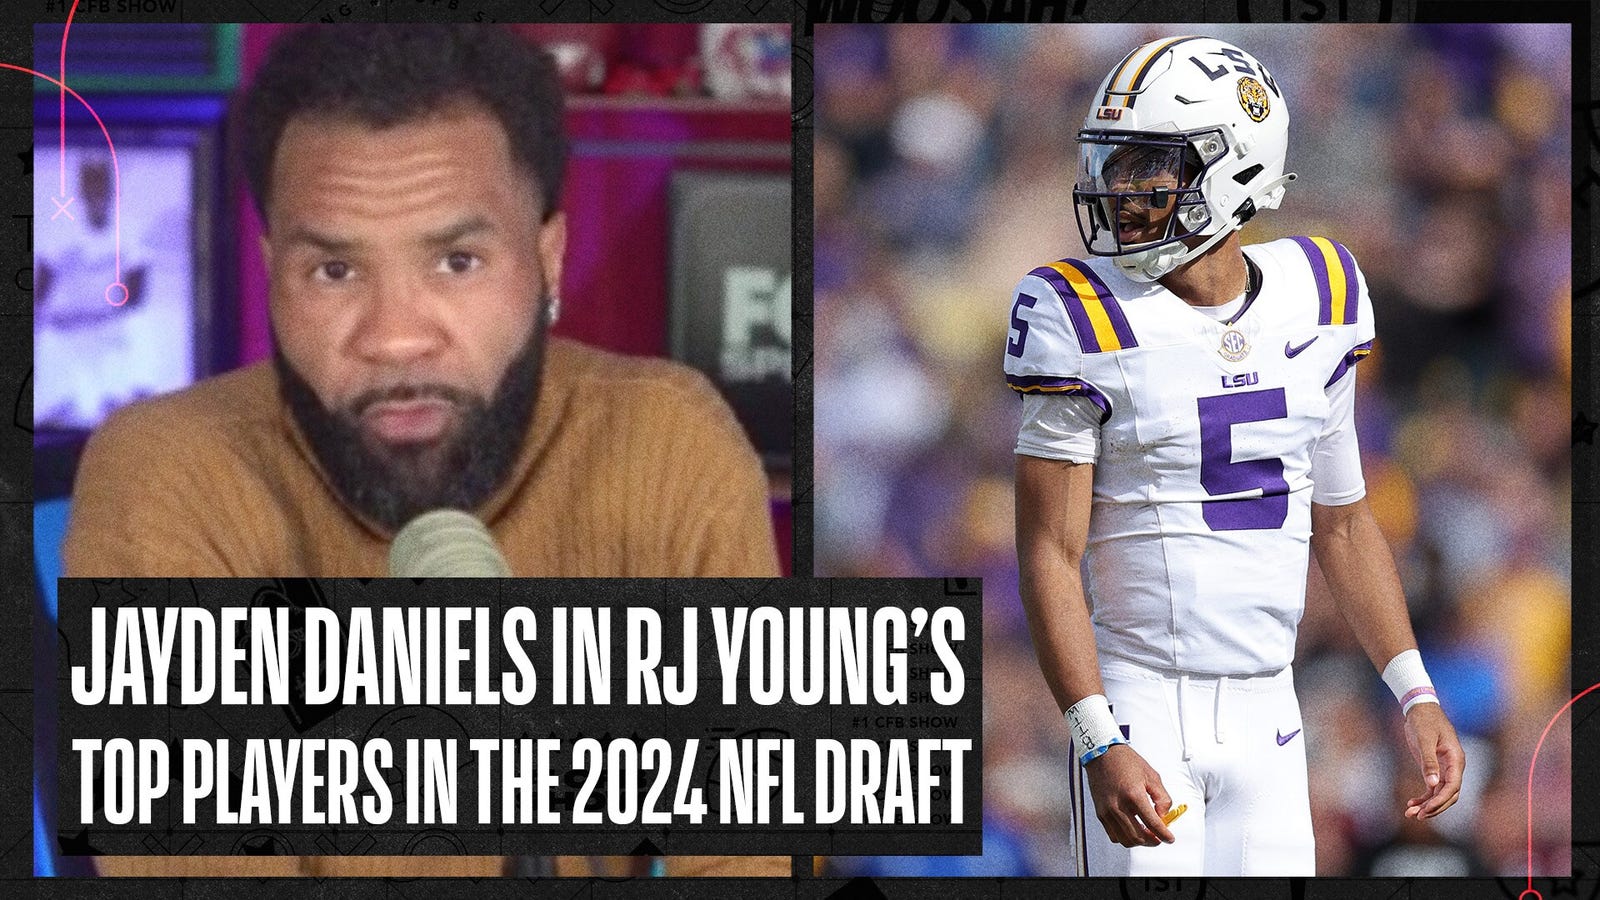 Jayden Daniels, Rome Odunze among RJ Young's top players in 2024 NFL Draft